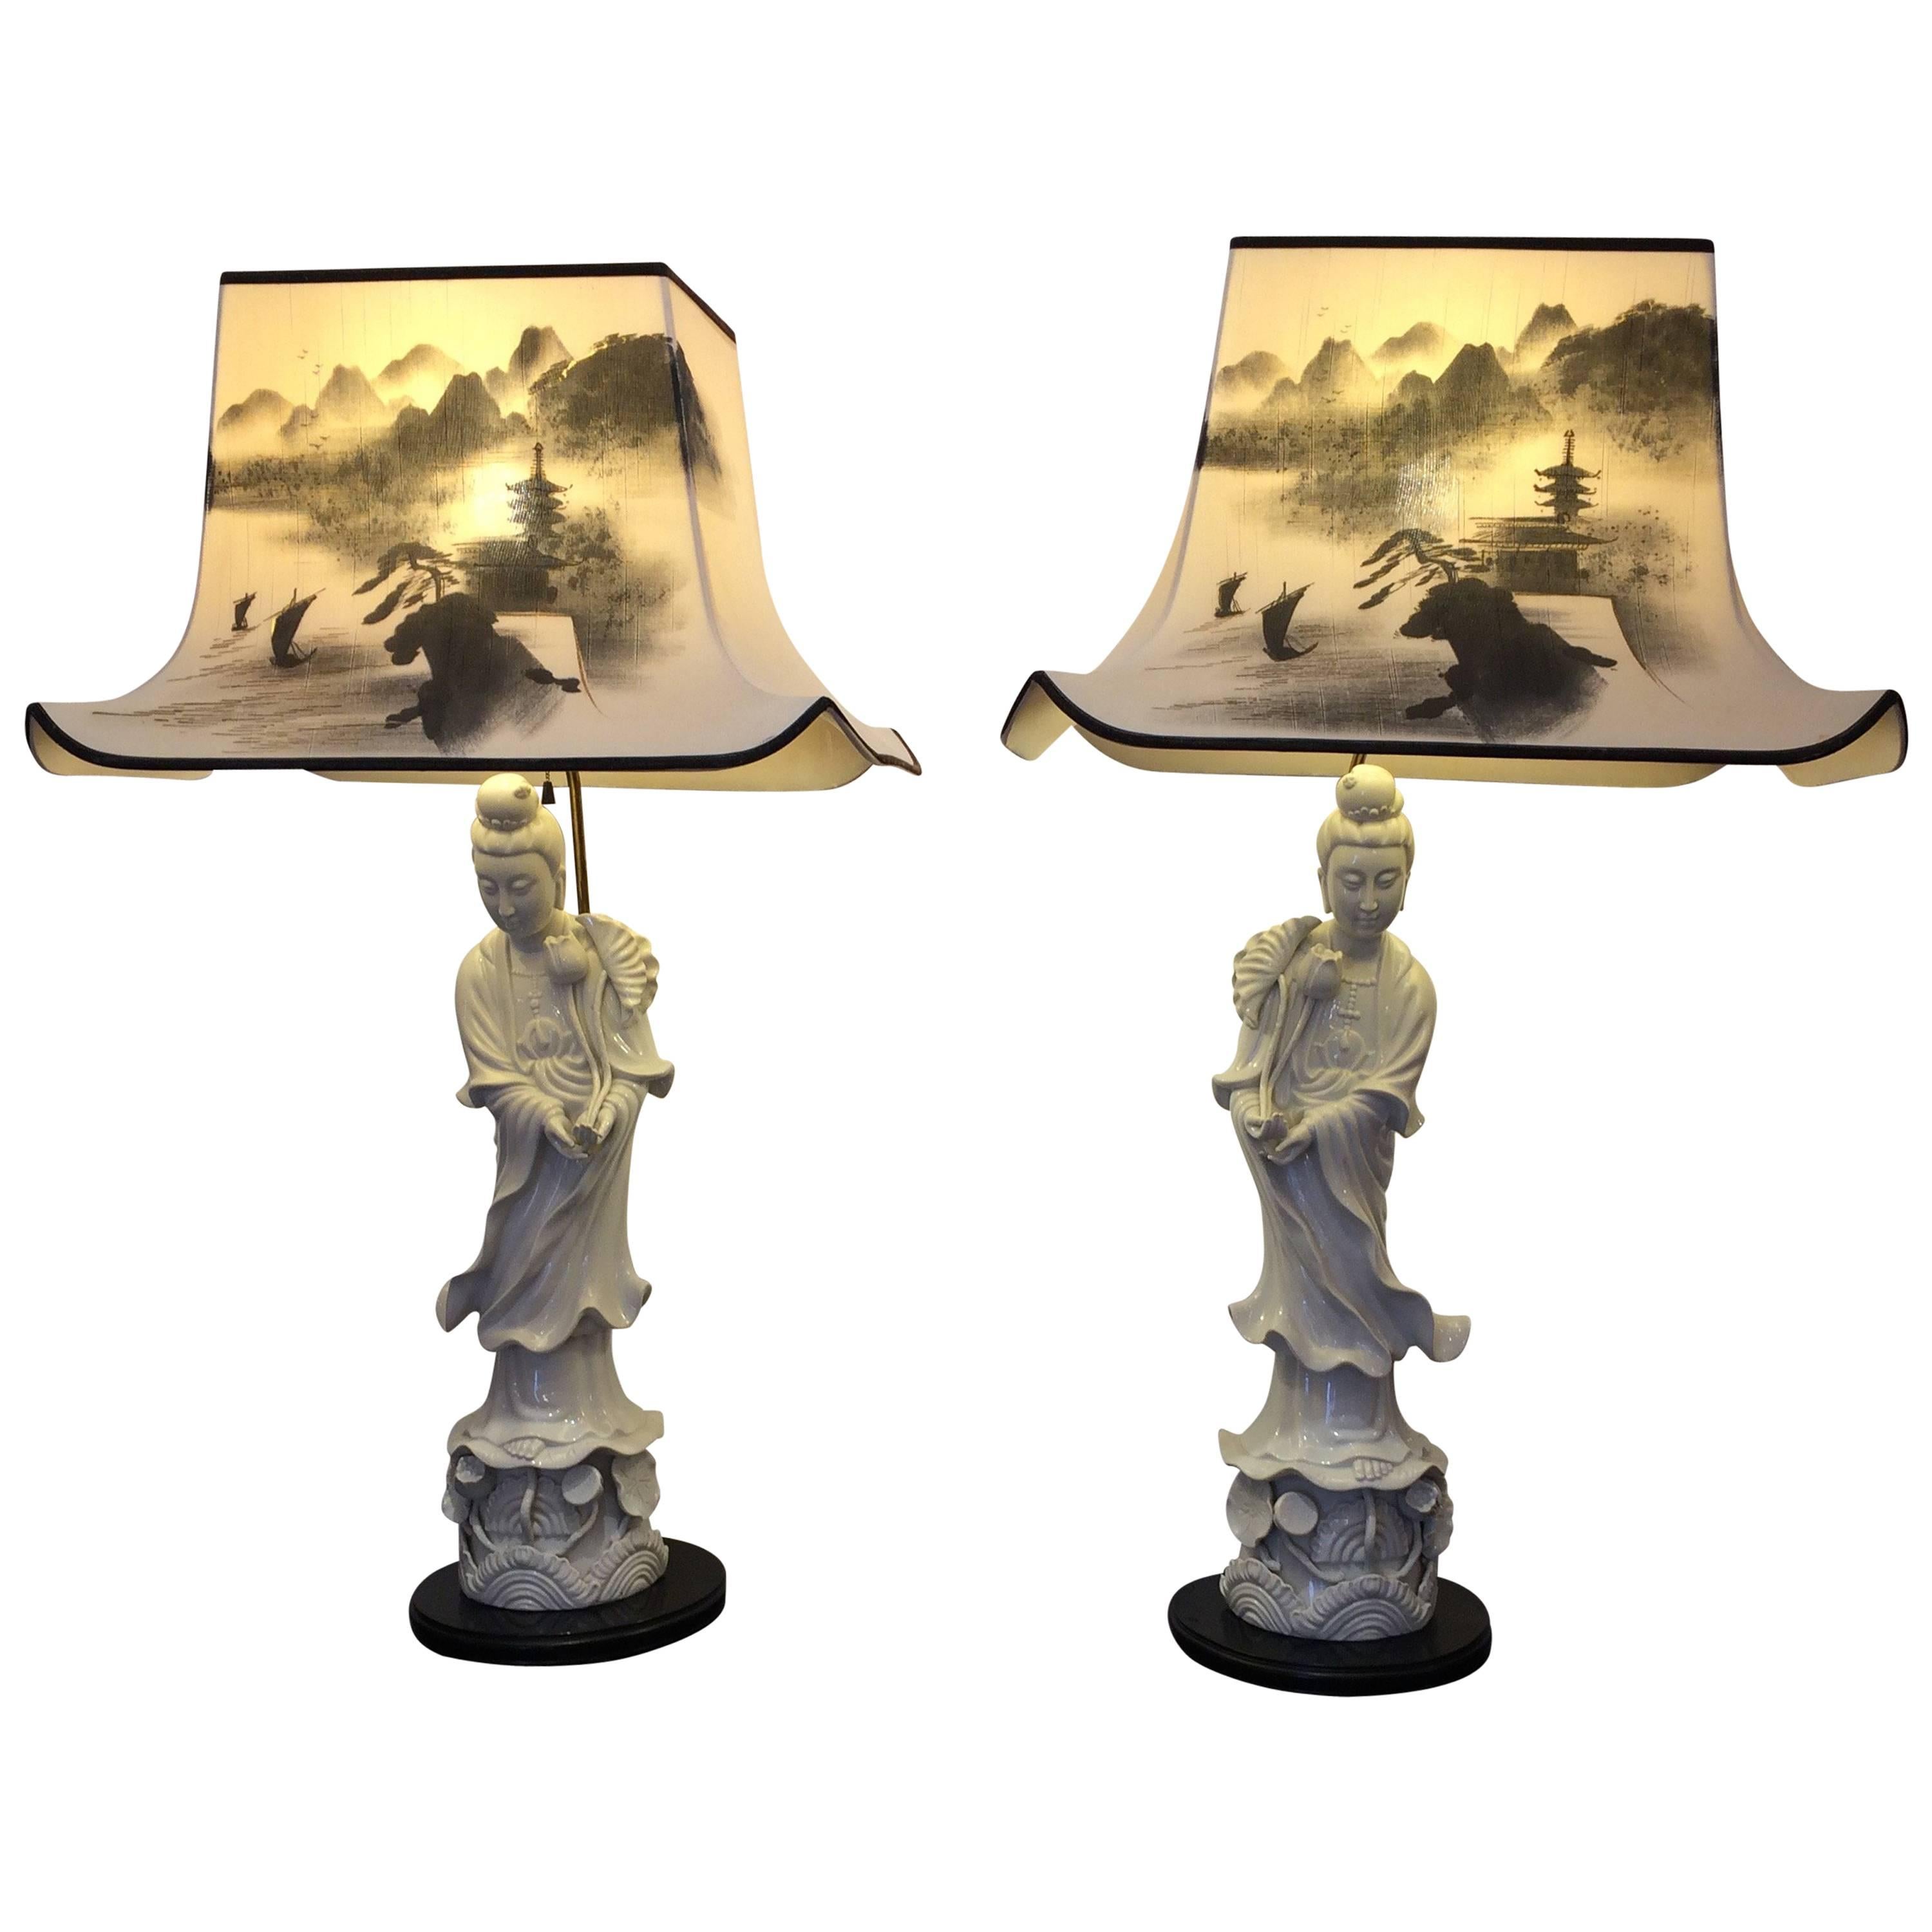 Pair of Magnificent Kwan Yin Figural Blanc De Chine Lamps